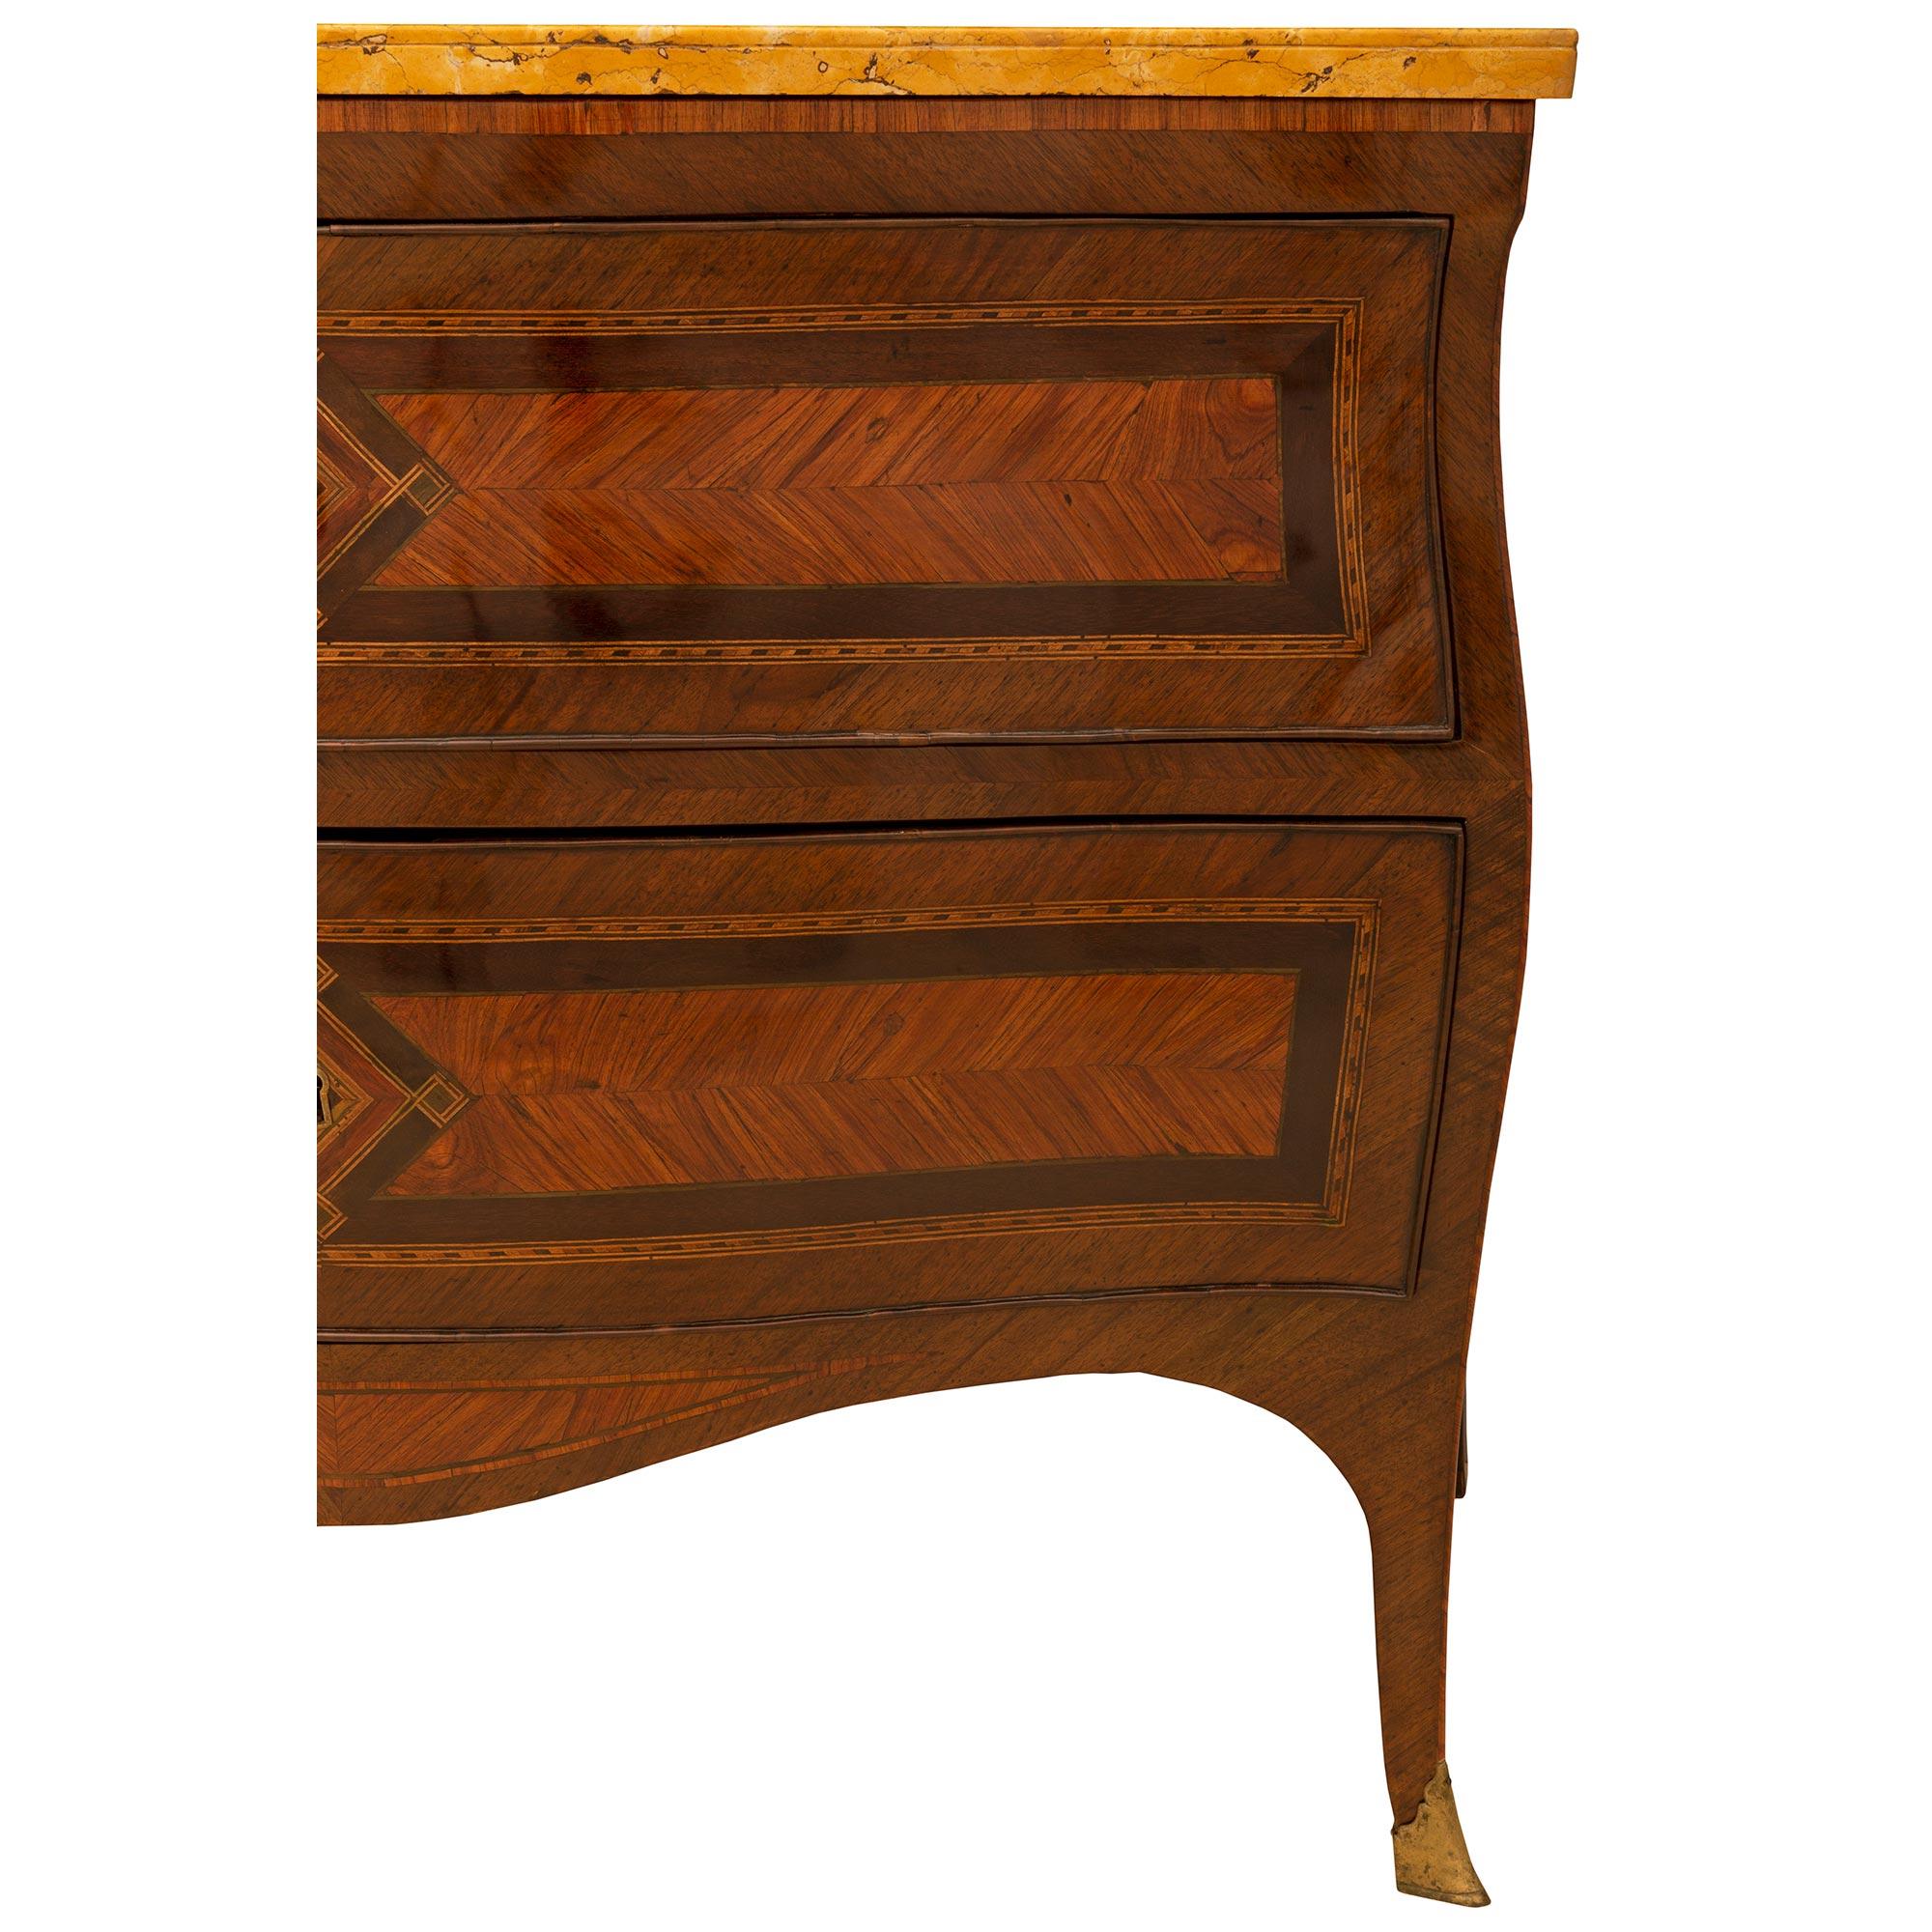 Italian 18th Century Louis XV Period Tulipwood and Kingwood Bombe Commodes For Sale 2